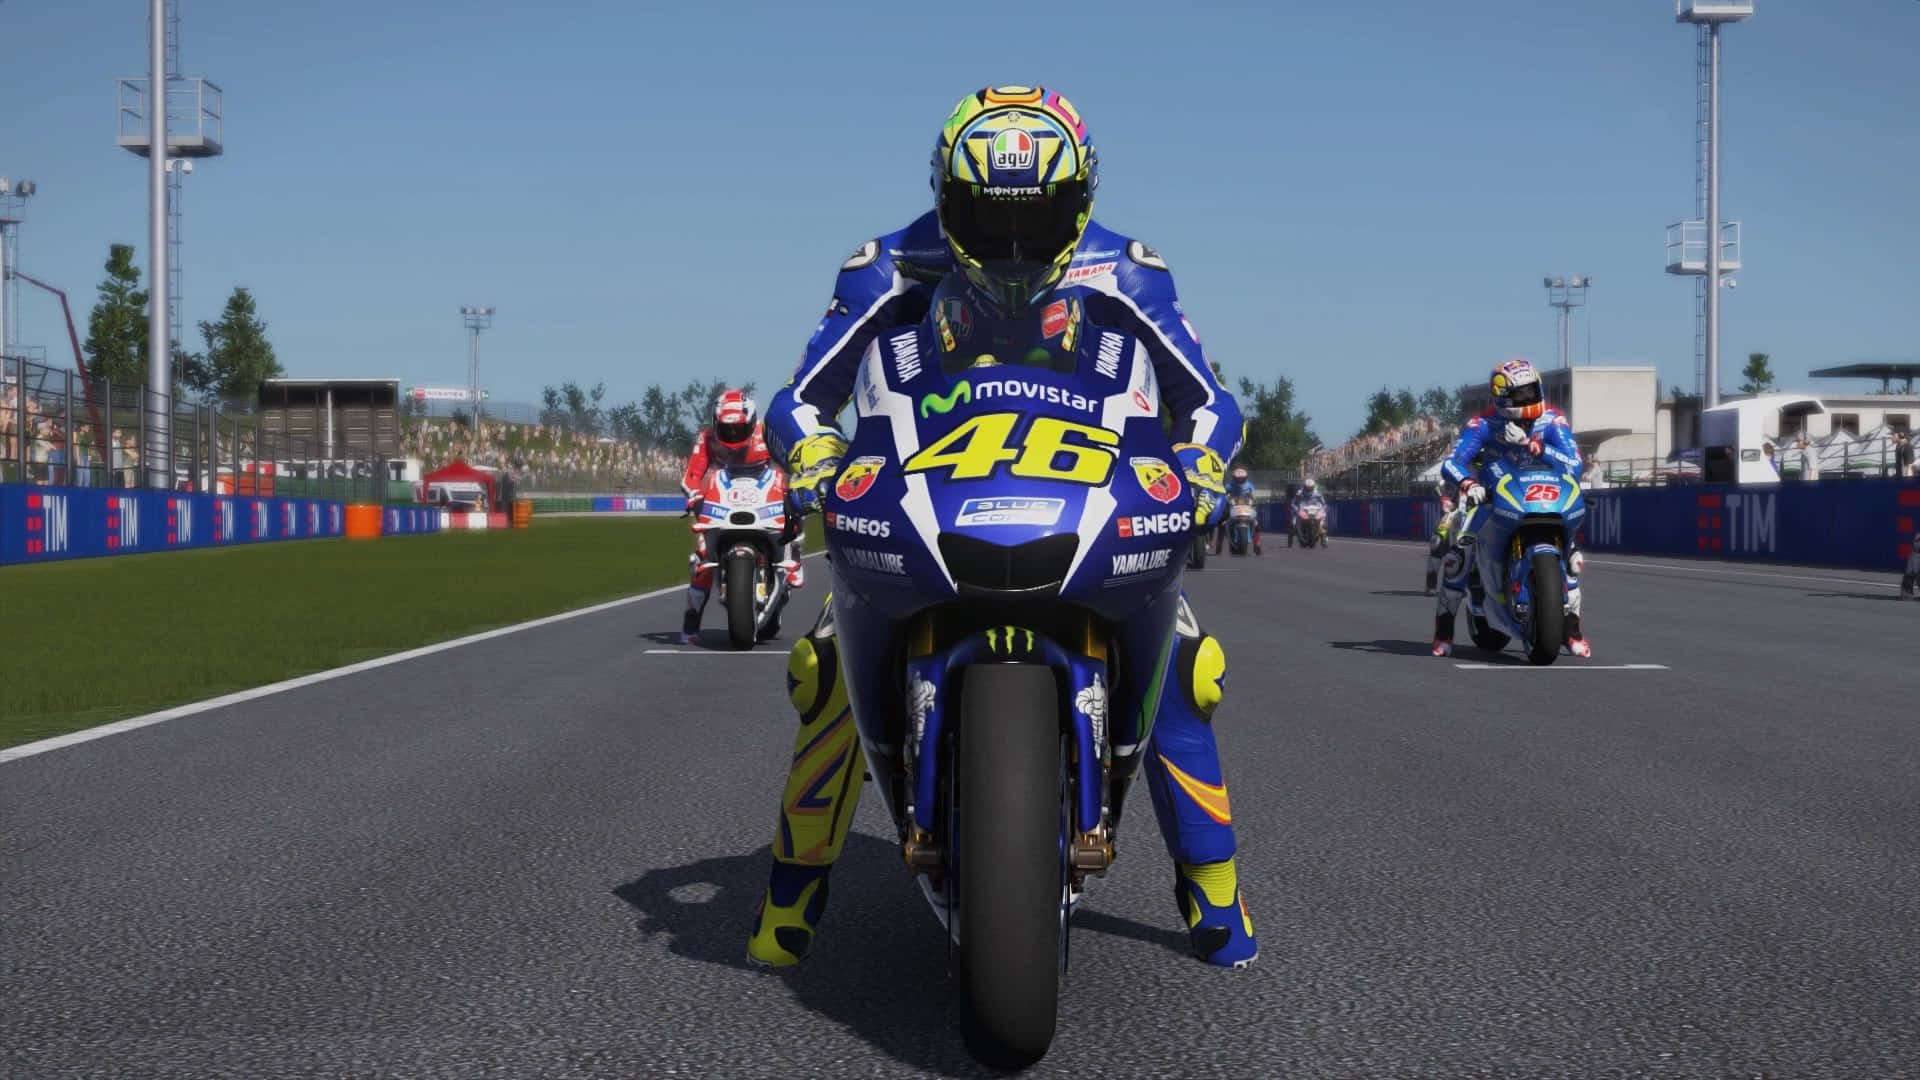 Vr46 In The Starting Line